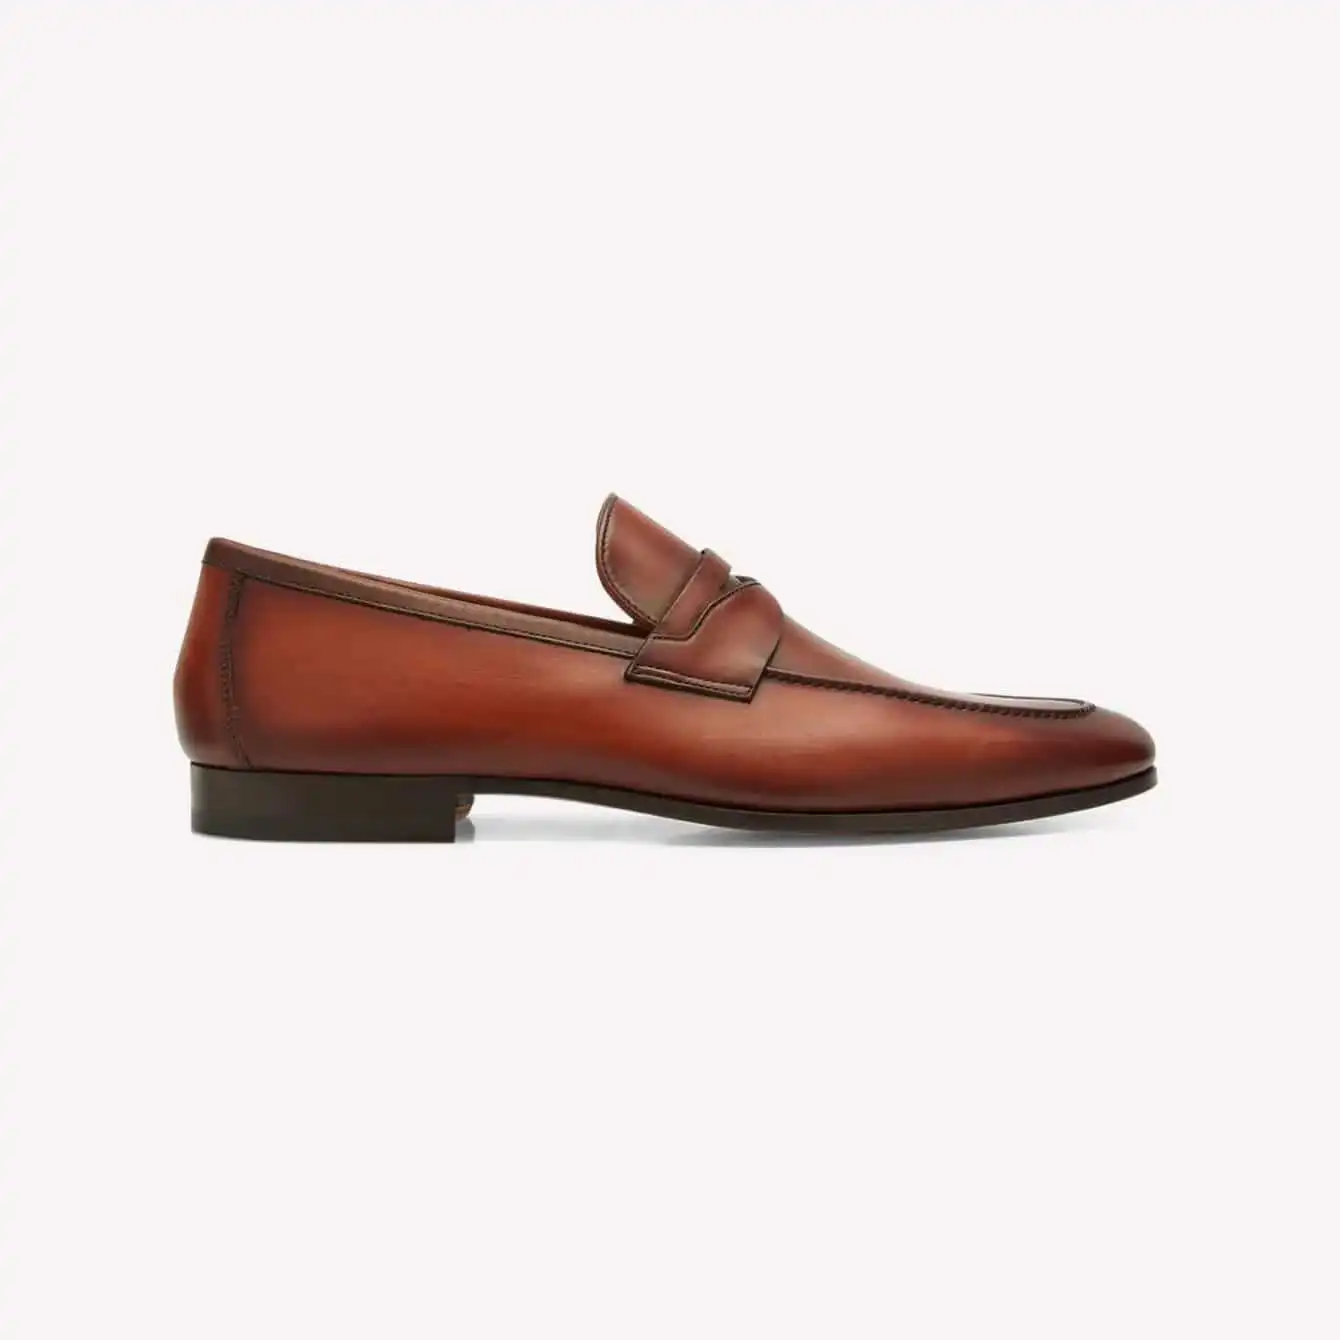 Magnanni - Sasso Leather Penny Loafers